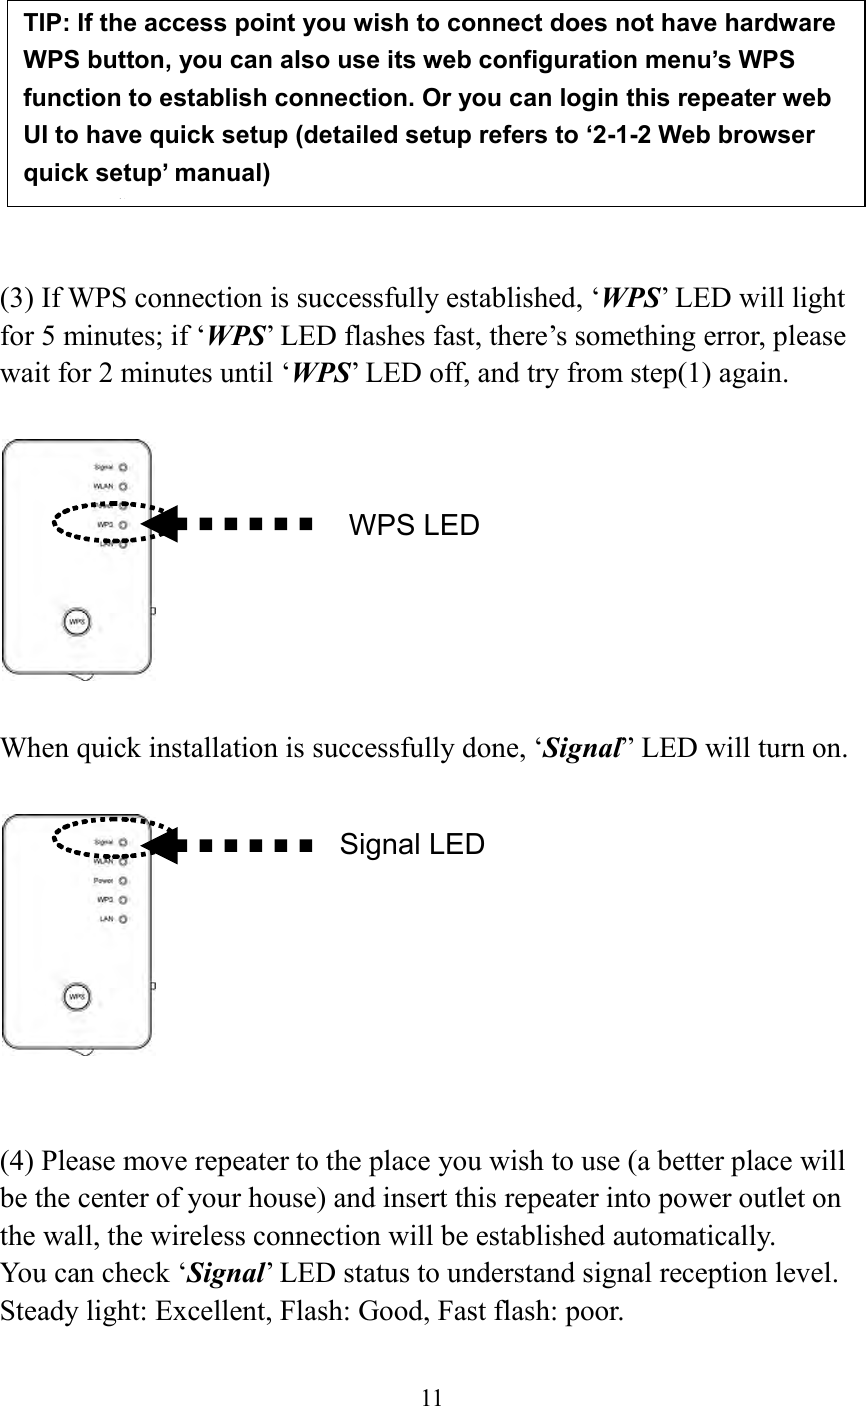  11           (3) If WPS connection is successfully established, ‘WPS’ LED will light for 5 minutes; if ‘WPS’ LED flashes fast, there’s something error, please wait for 2 minutes until ‘WPS’ LED off, and try from step(1) again.      When quick installation is successfully done, ‘Signal” LED will turn on.     (4) Please move repeater to the place you wish to use (a better place will be the center of your house) and insert this repeater into power outlet on the wall, the wireless connection will be established automatically.   You can check ‘Signal’ LED status to understand signal reception level.   Steady light: Excellent, Flash: Good, Fast flash: poor.  TIP: If the access point you wish to connect does not have hardware WPS button, you can also use its web configuration menu’s WPS function to establish connection. Or you can login this repeater web UI to have quick setup (detailed setup refers to ‘2-1-2 Web browser quick setup’ manual)   manual)  WPS LED Signal LED 